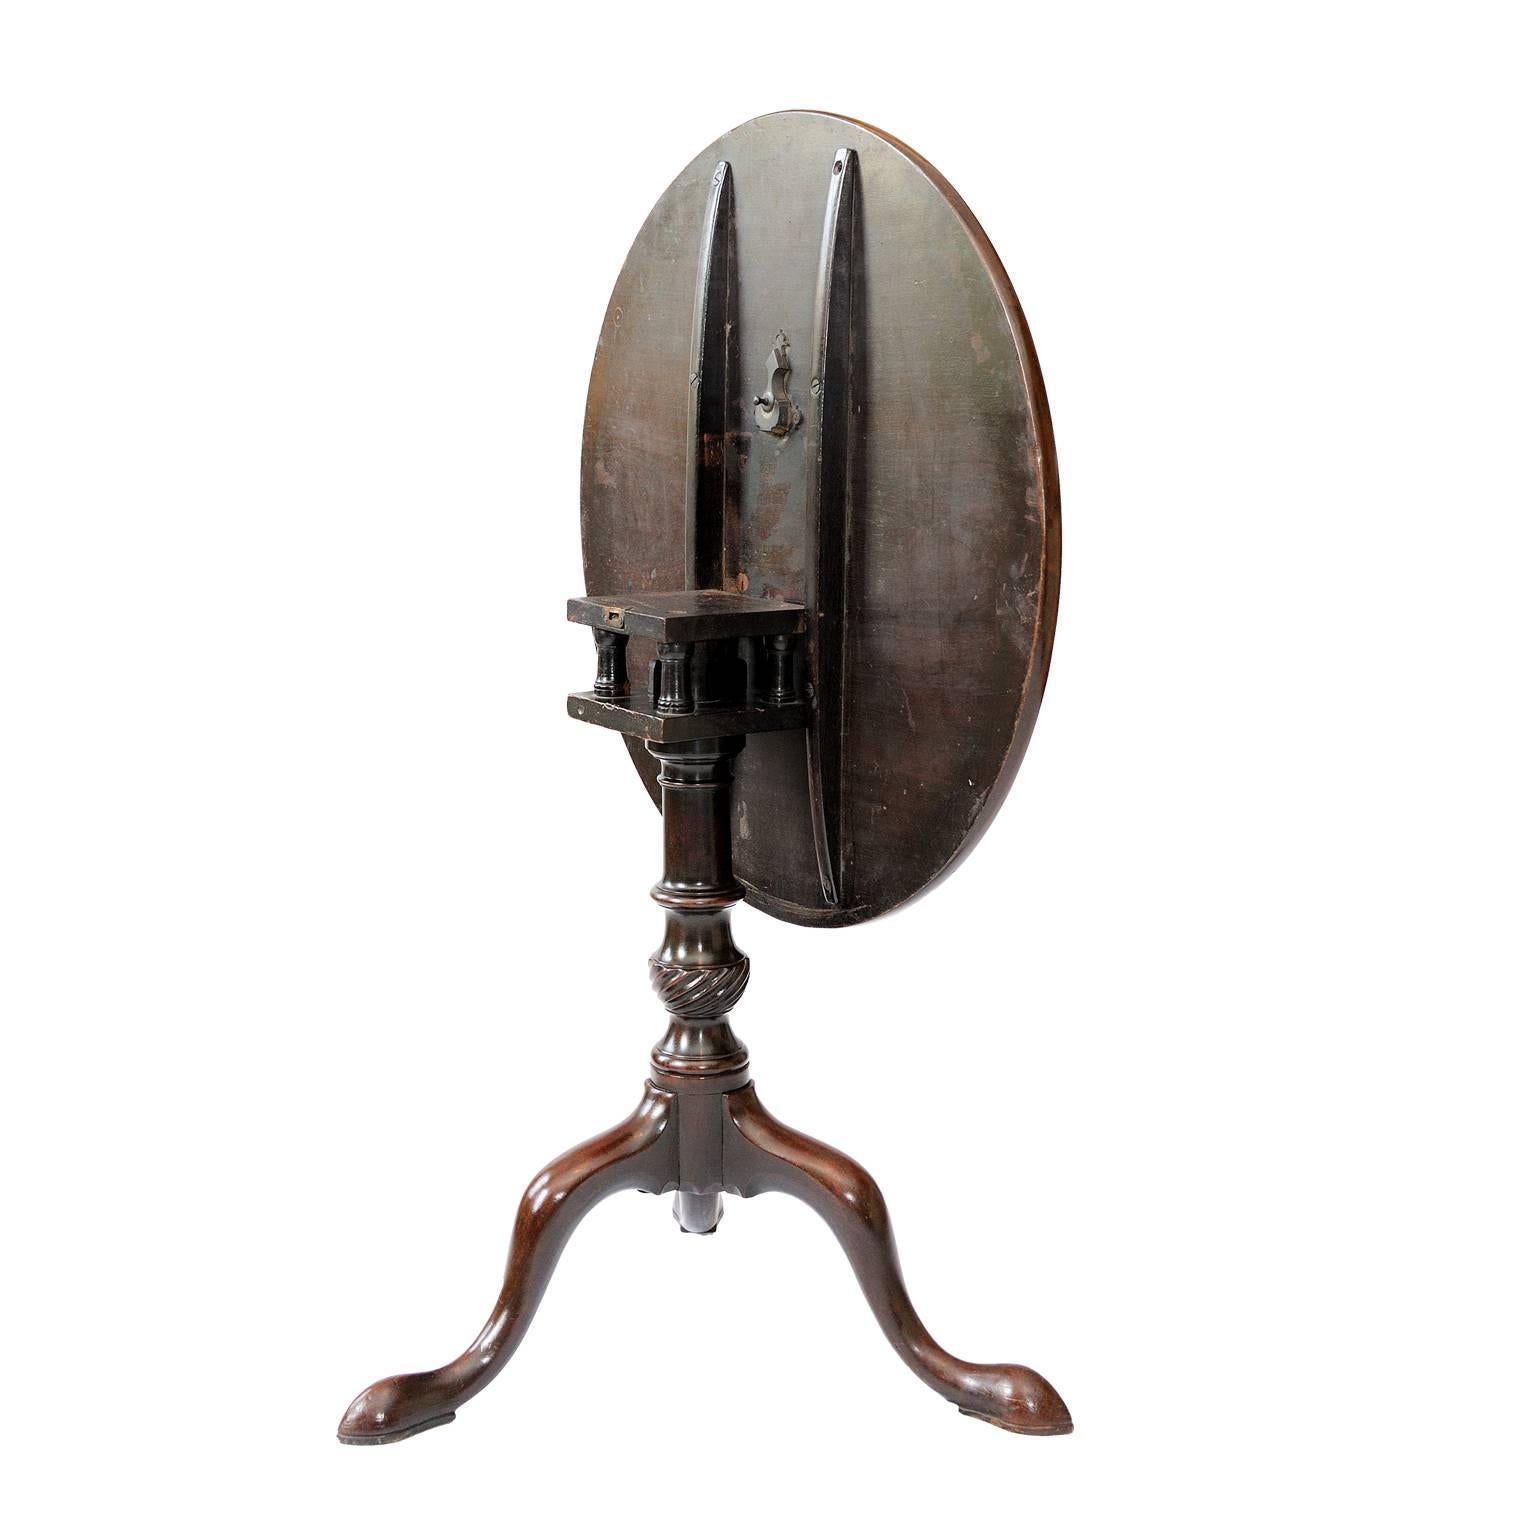 Early George III English mahogany tripod table with tip-top and rotating birdcage hinge mechanism (c.1760)